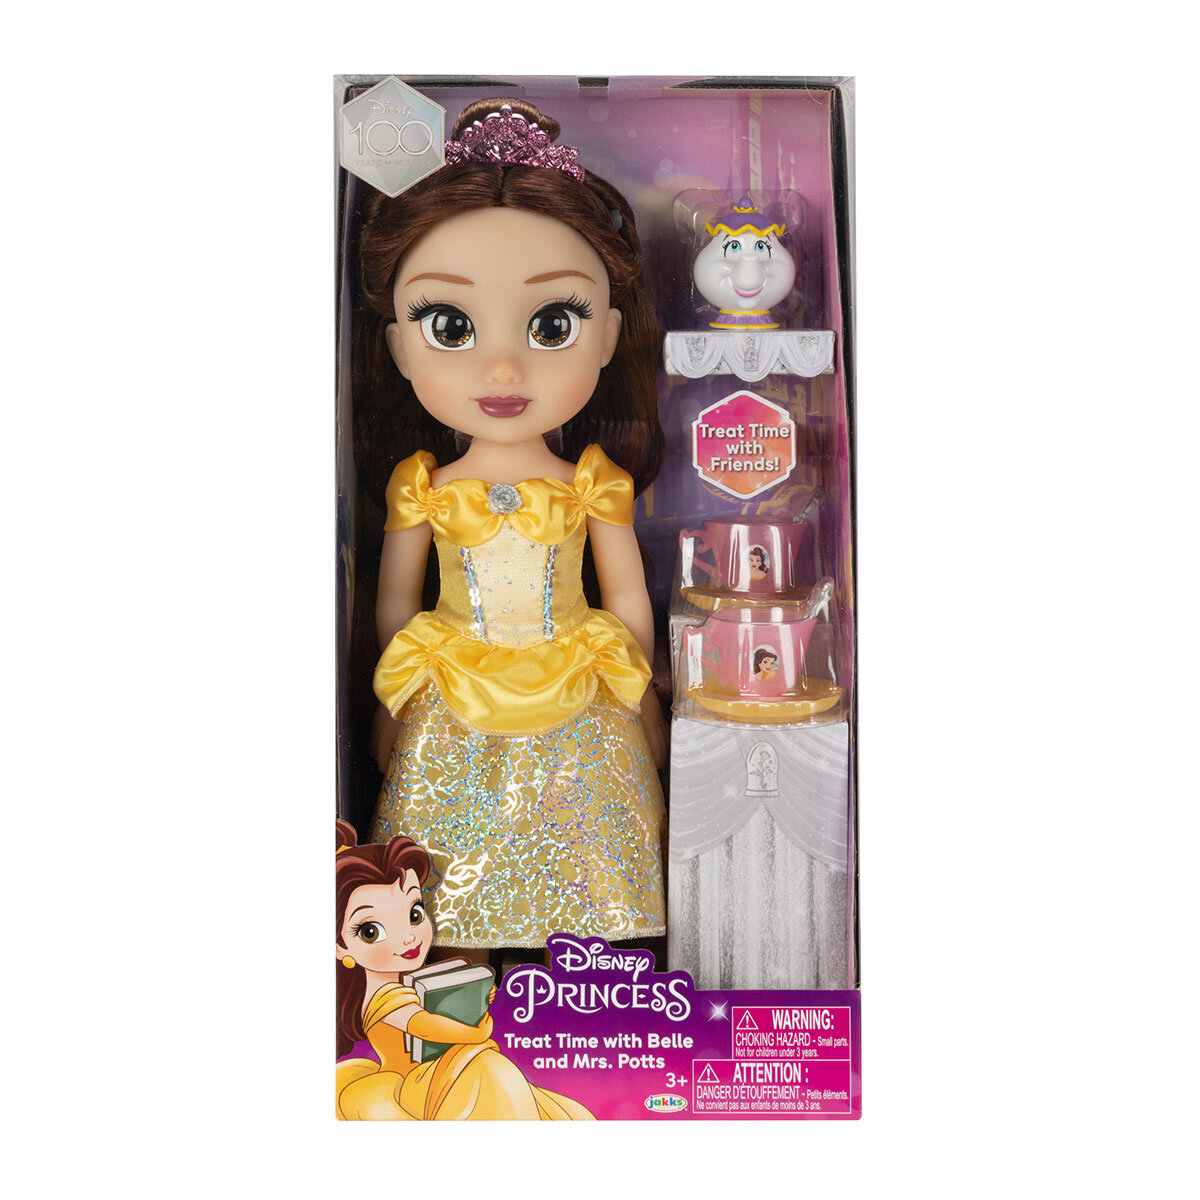 Buy Disney Tea Time Party Doll Belle & Mrs Potts Lifestyle Image at Costco.co.uk